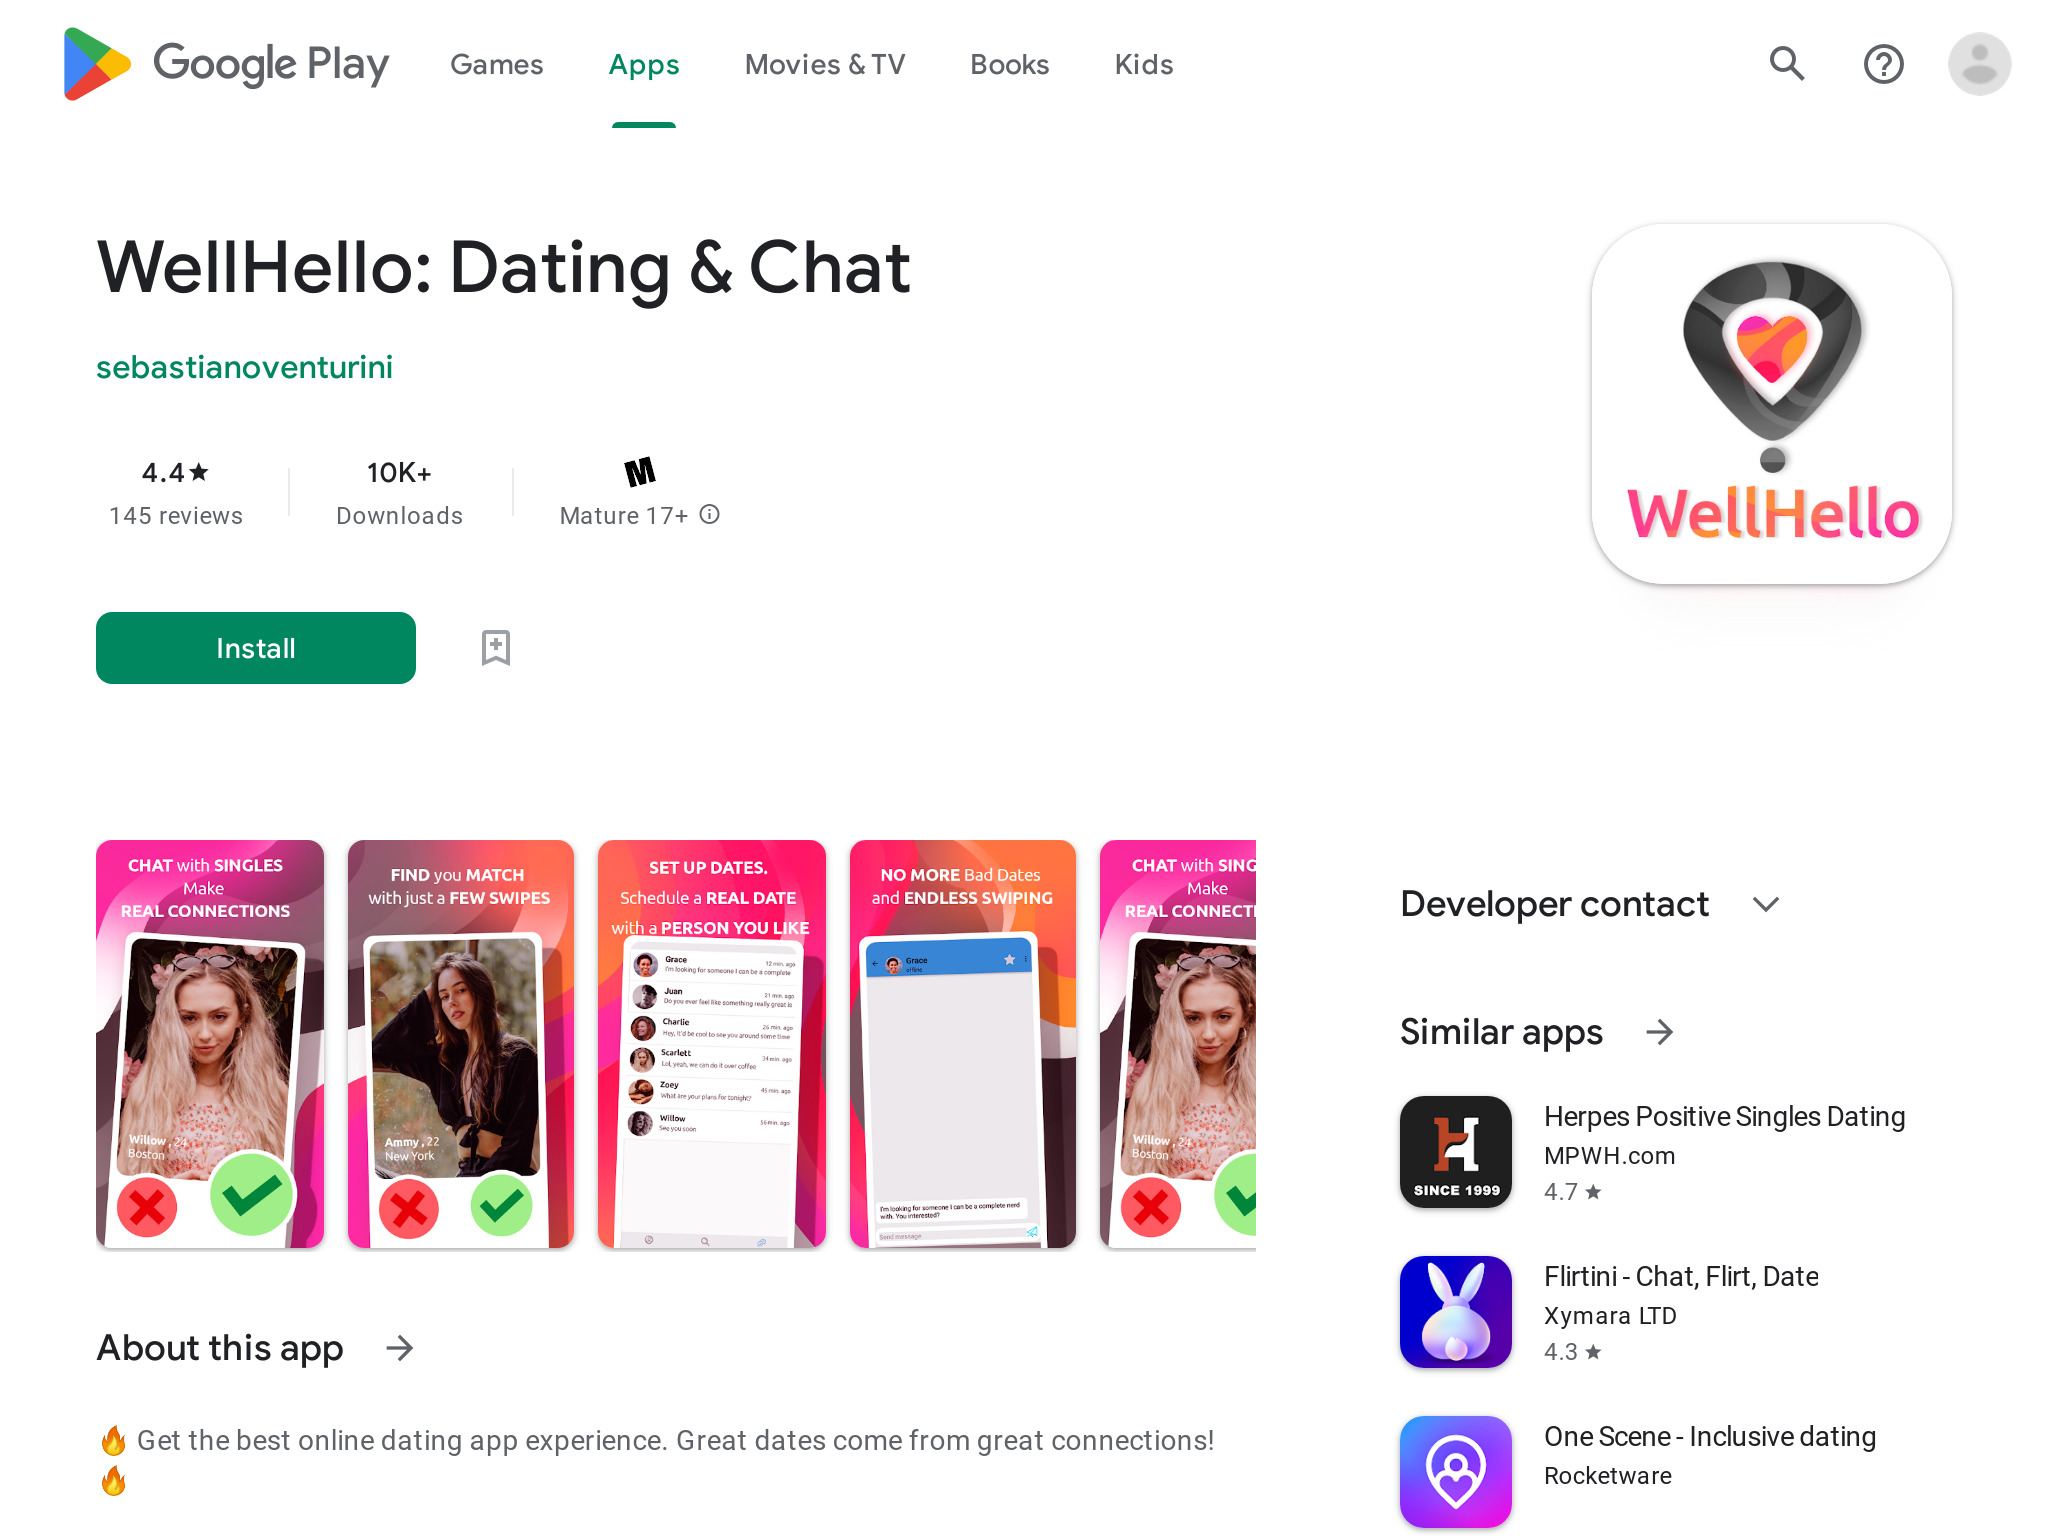 WellHello Review – Vale a pena?